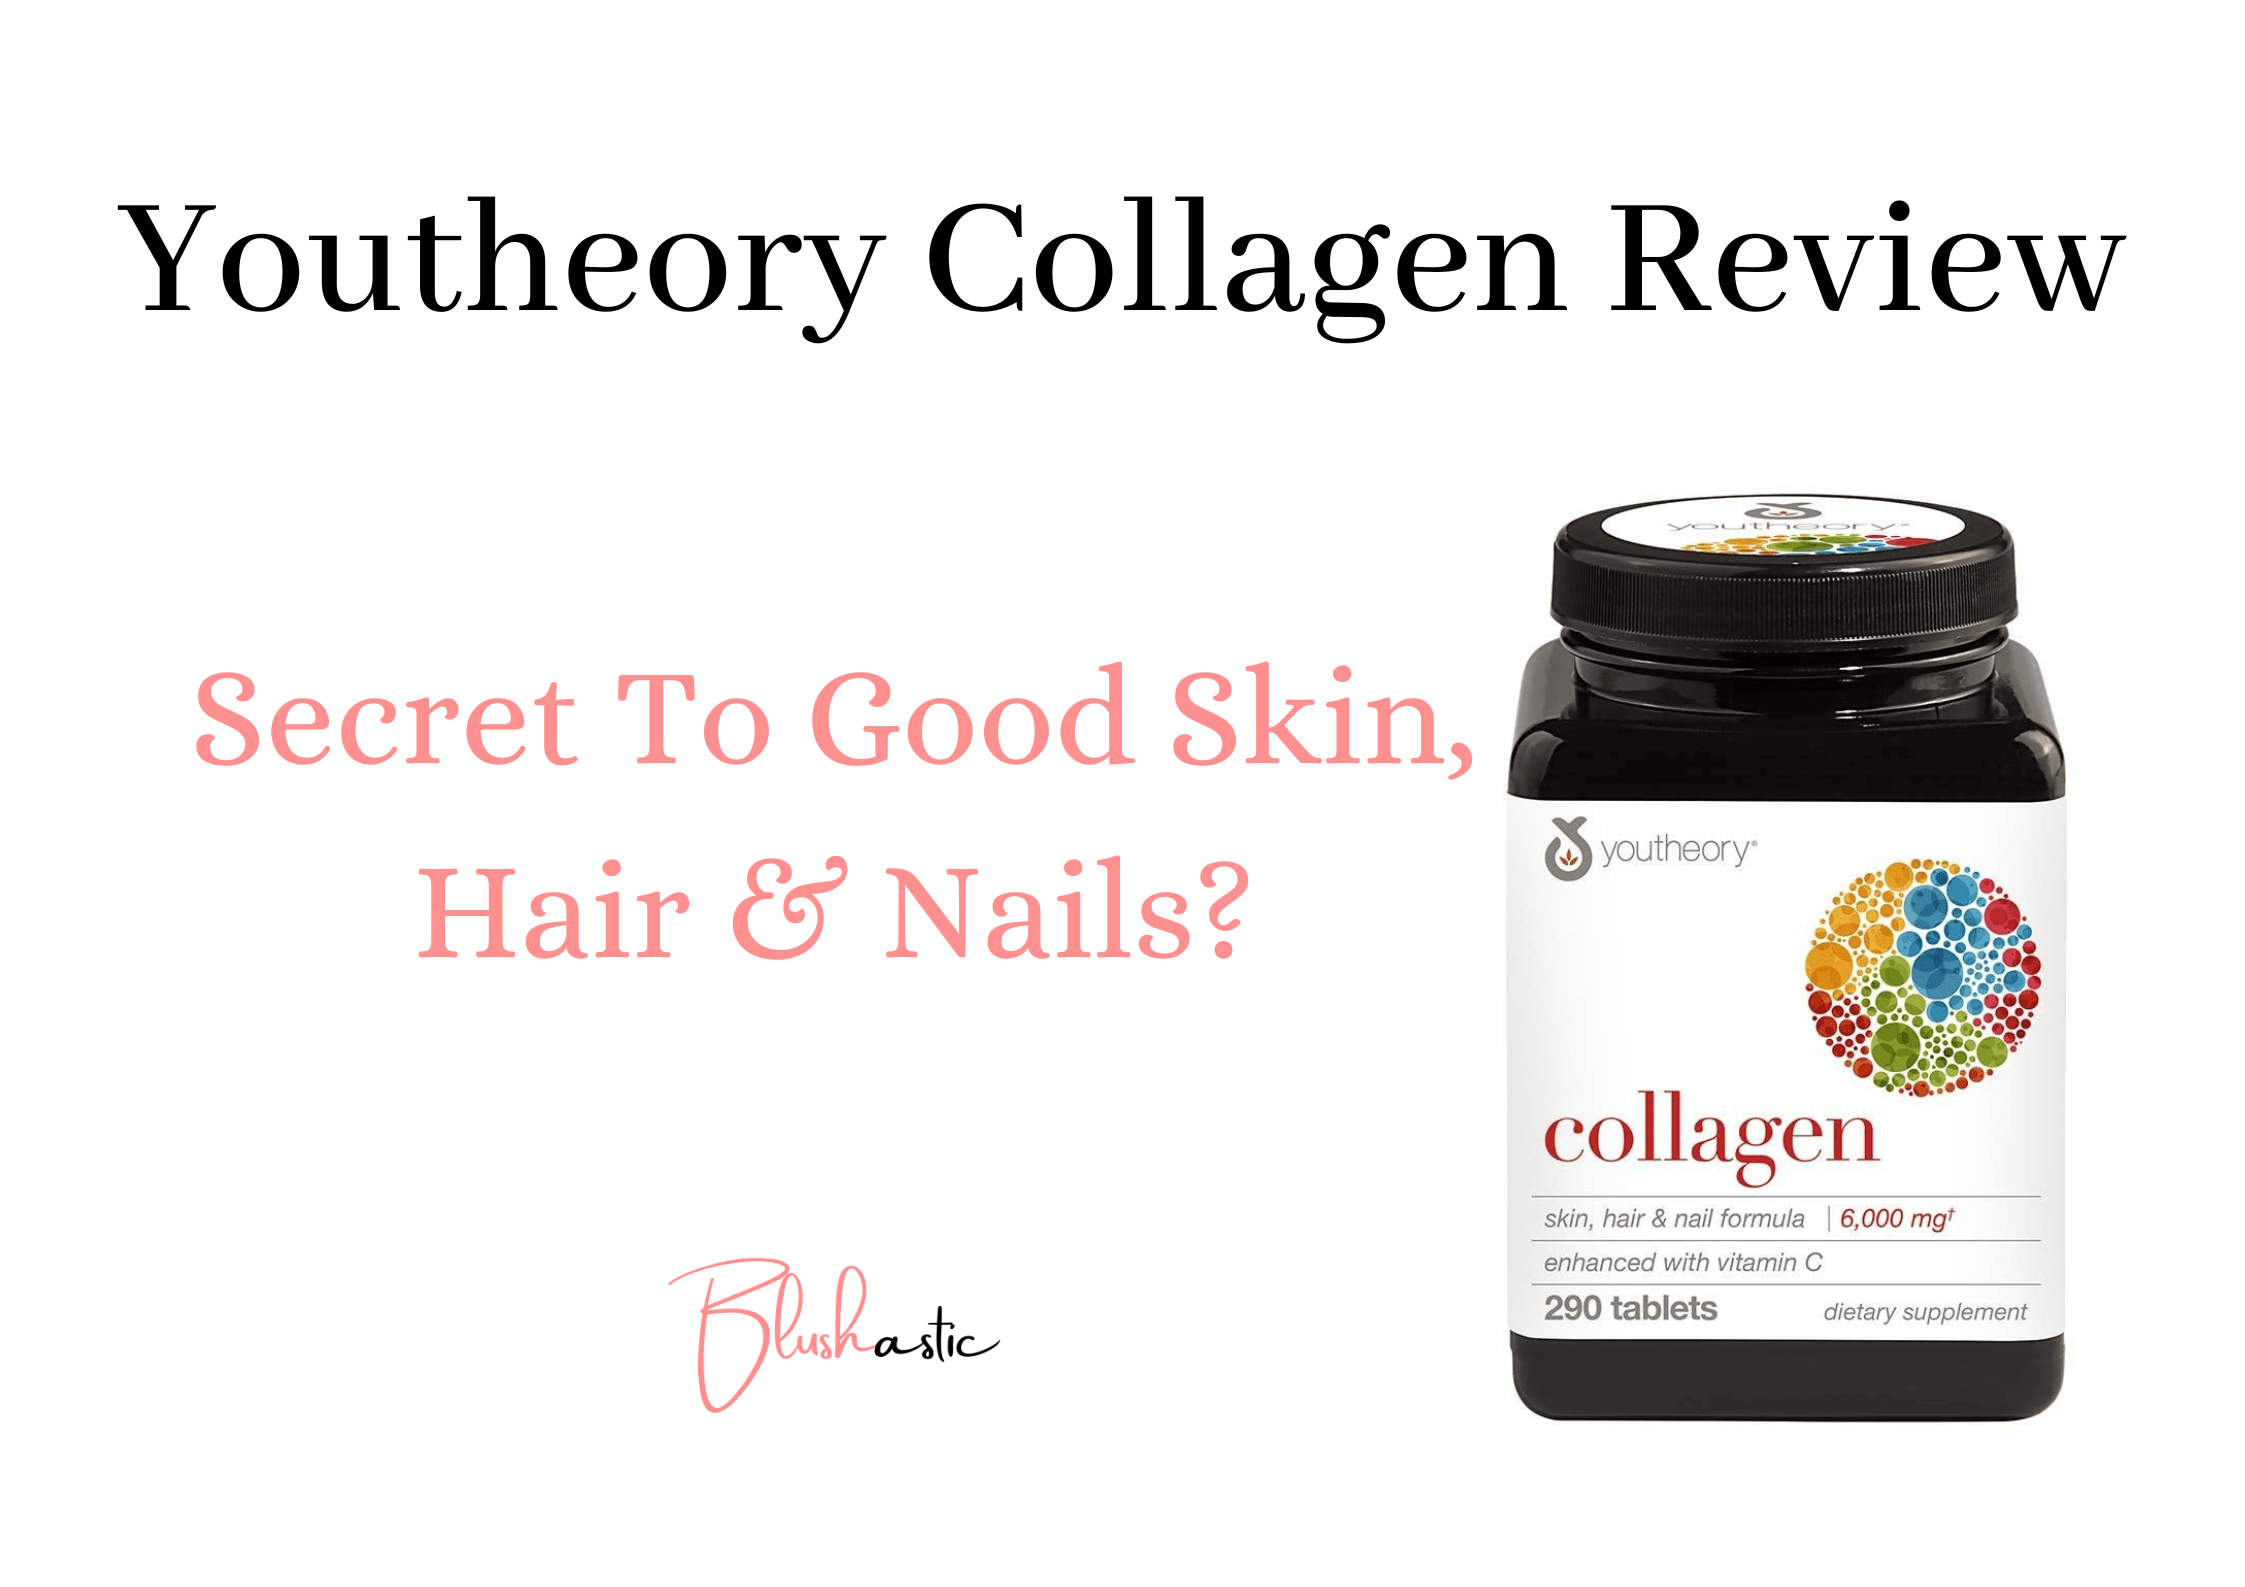 Youtheory Collagen Reviews | Secret To Good Skin, Hair & Nails? - Blushastic